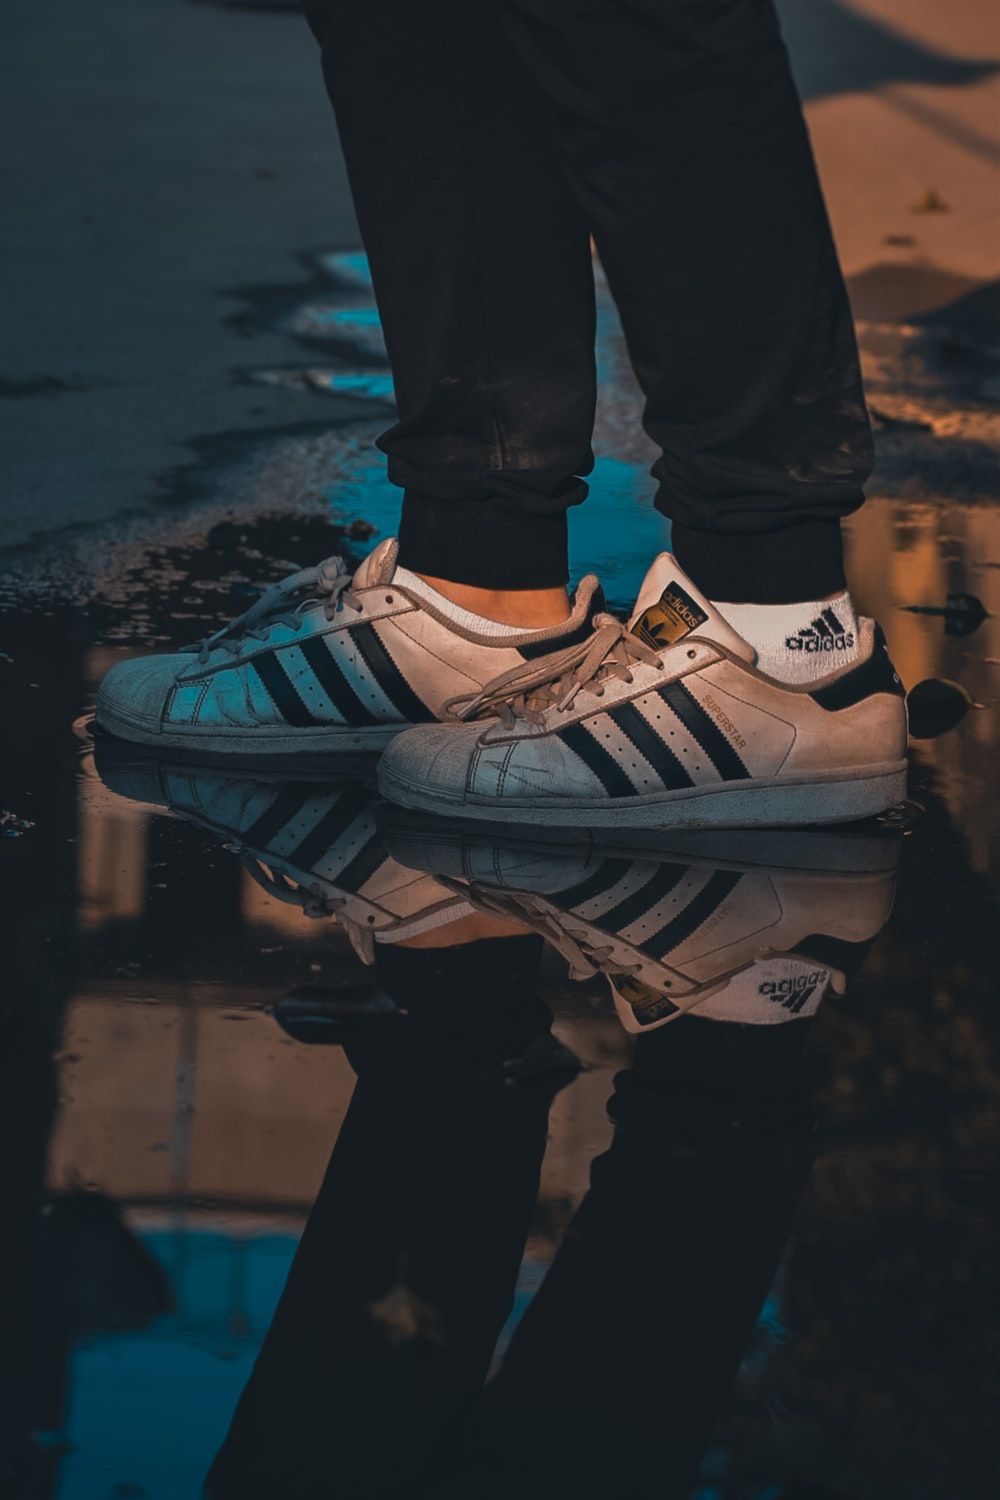 Adidas Superstar Picture. Download Free Image